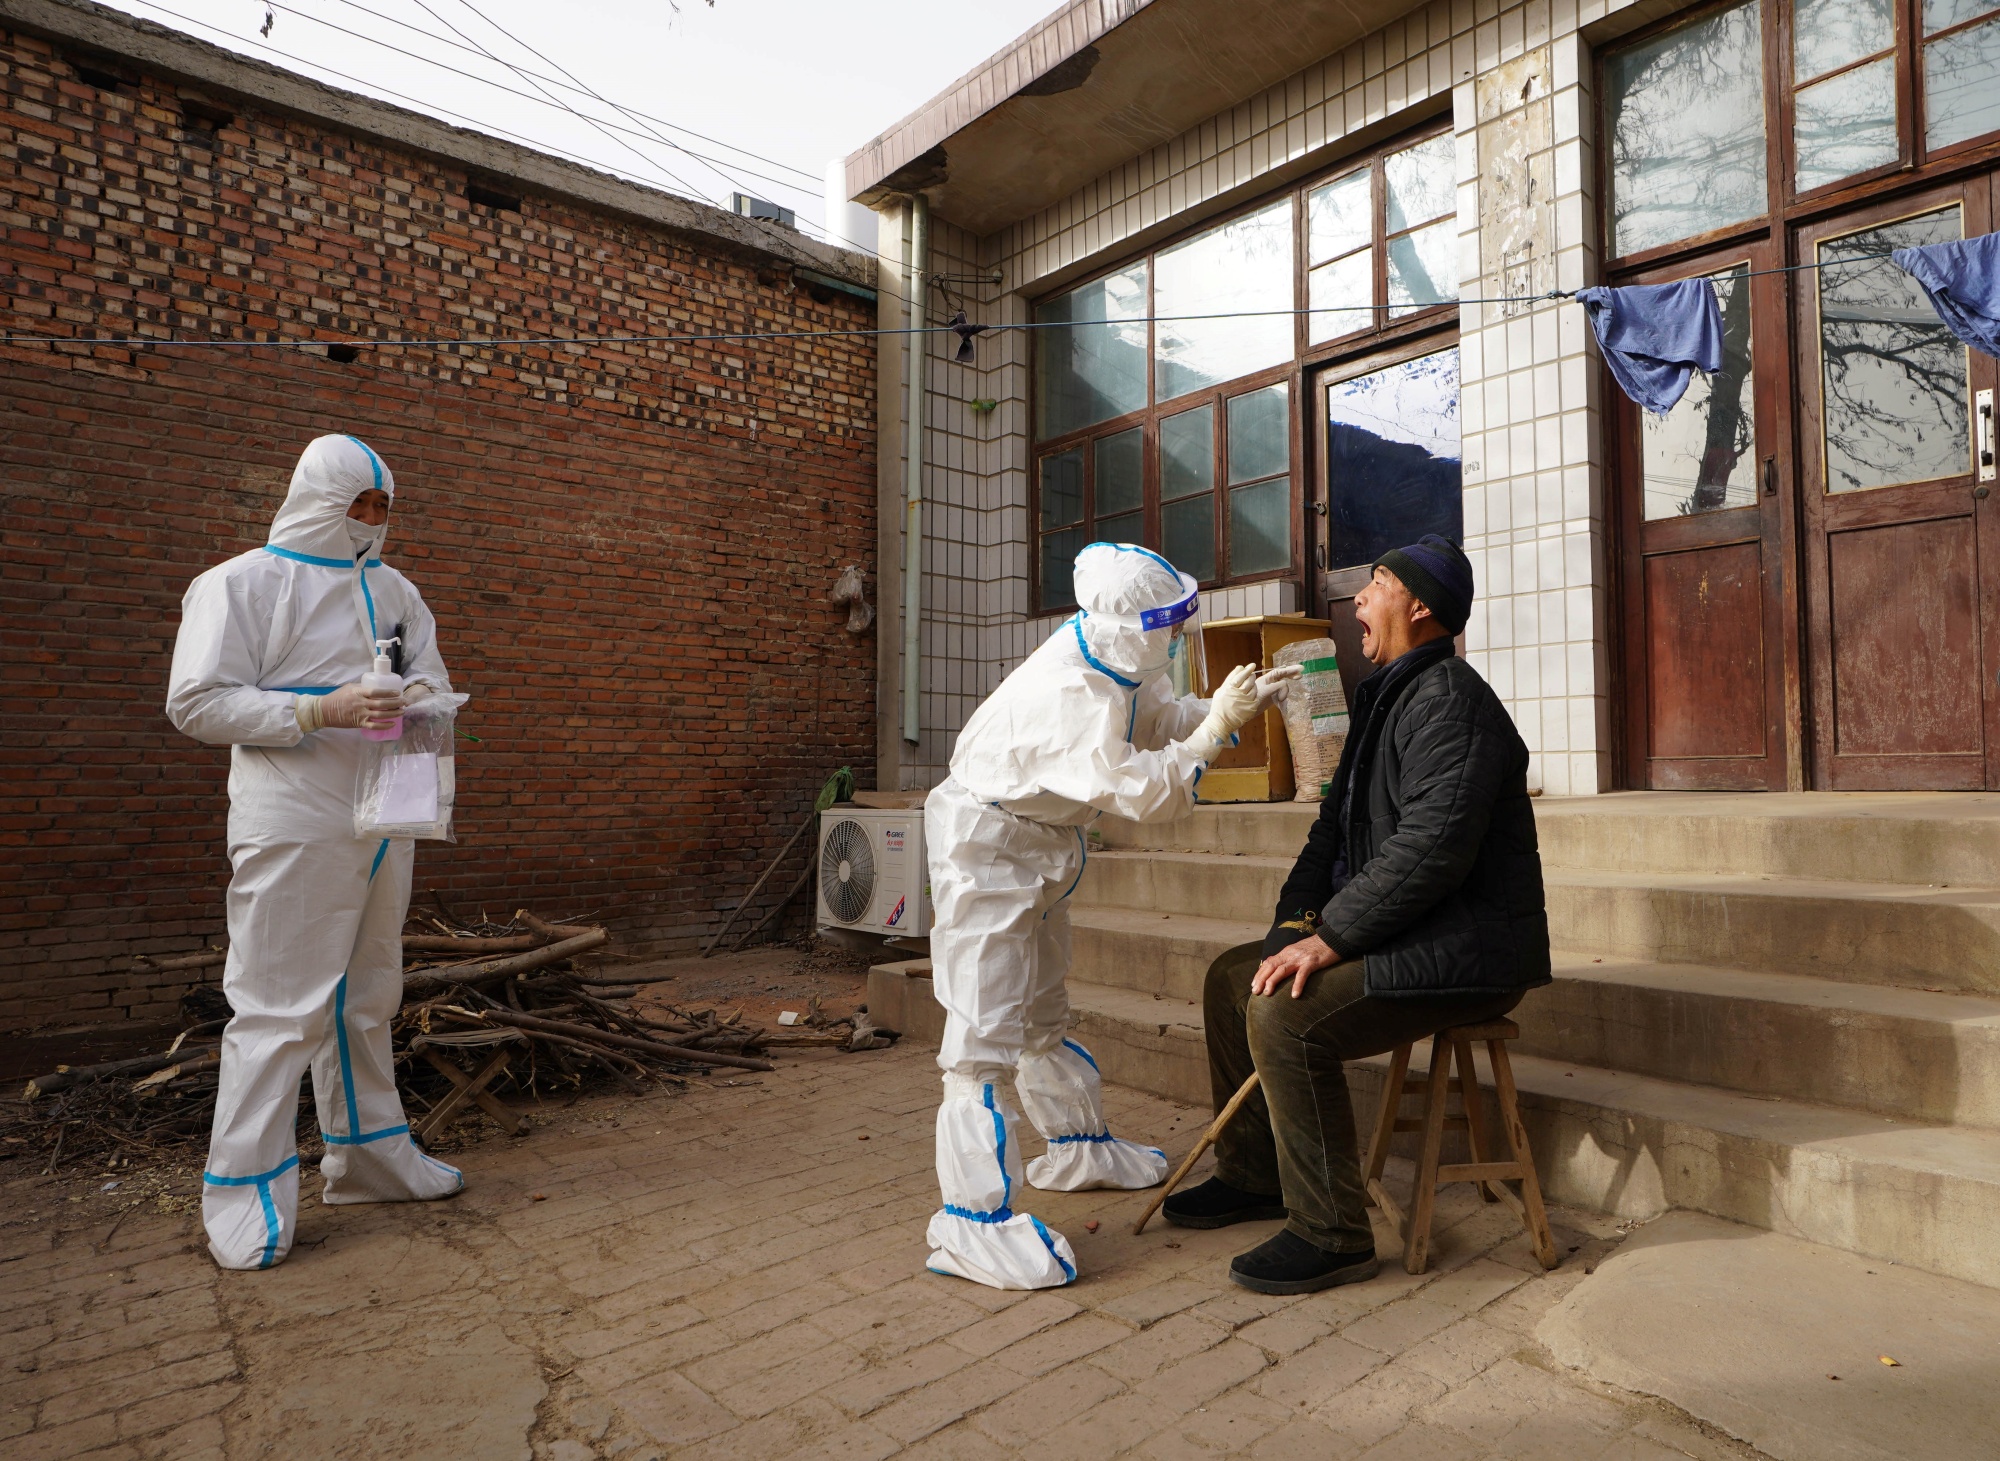 A villager at Shizhuang Village undergoes Covid-19 testing in Shijiazhuang City, Hebei Province, Jan. 12.